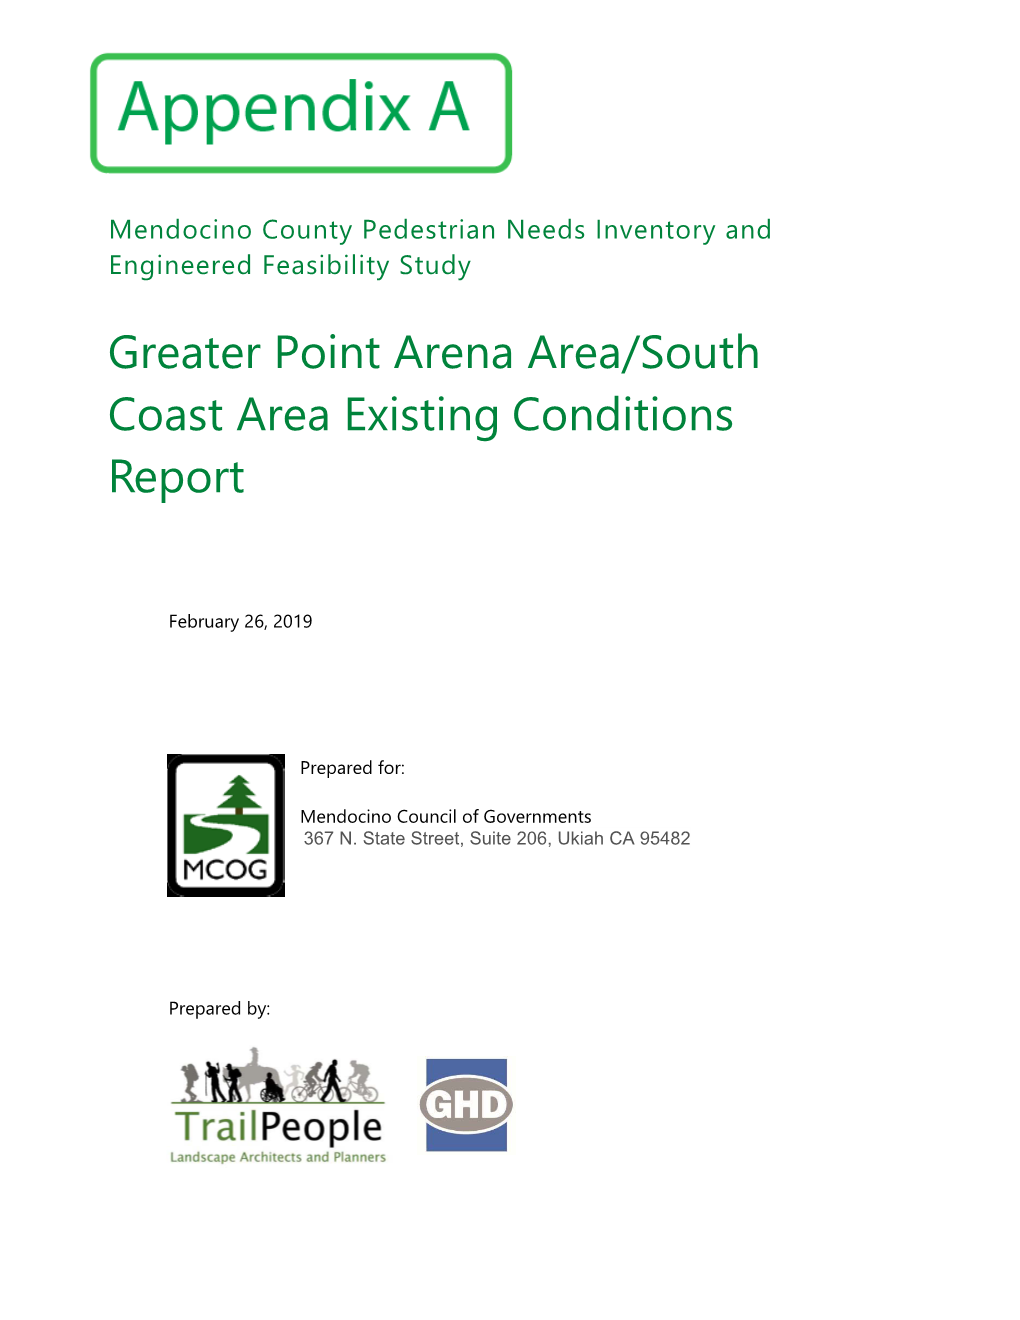 South Coast Existing Conditions Report